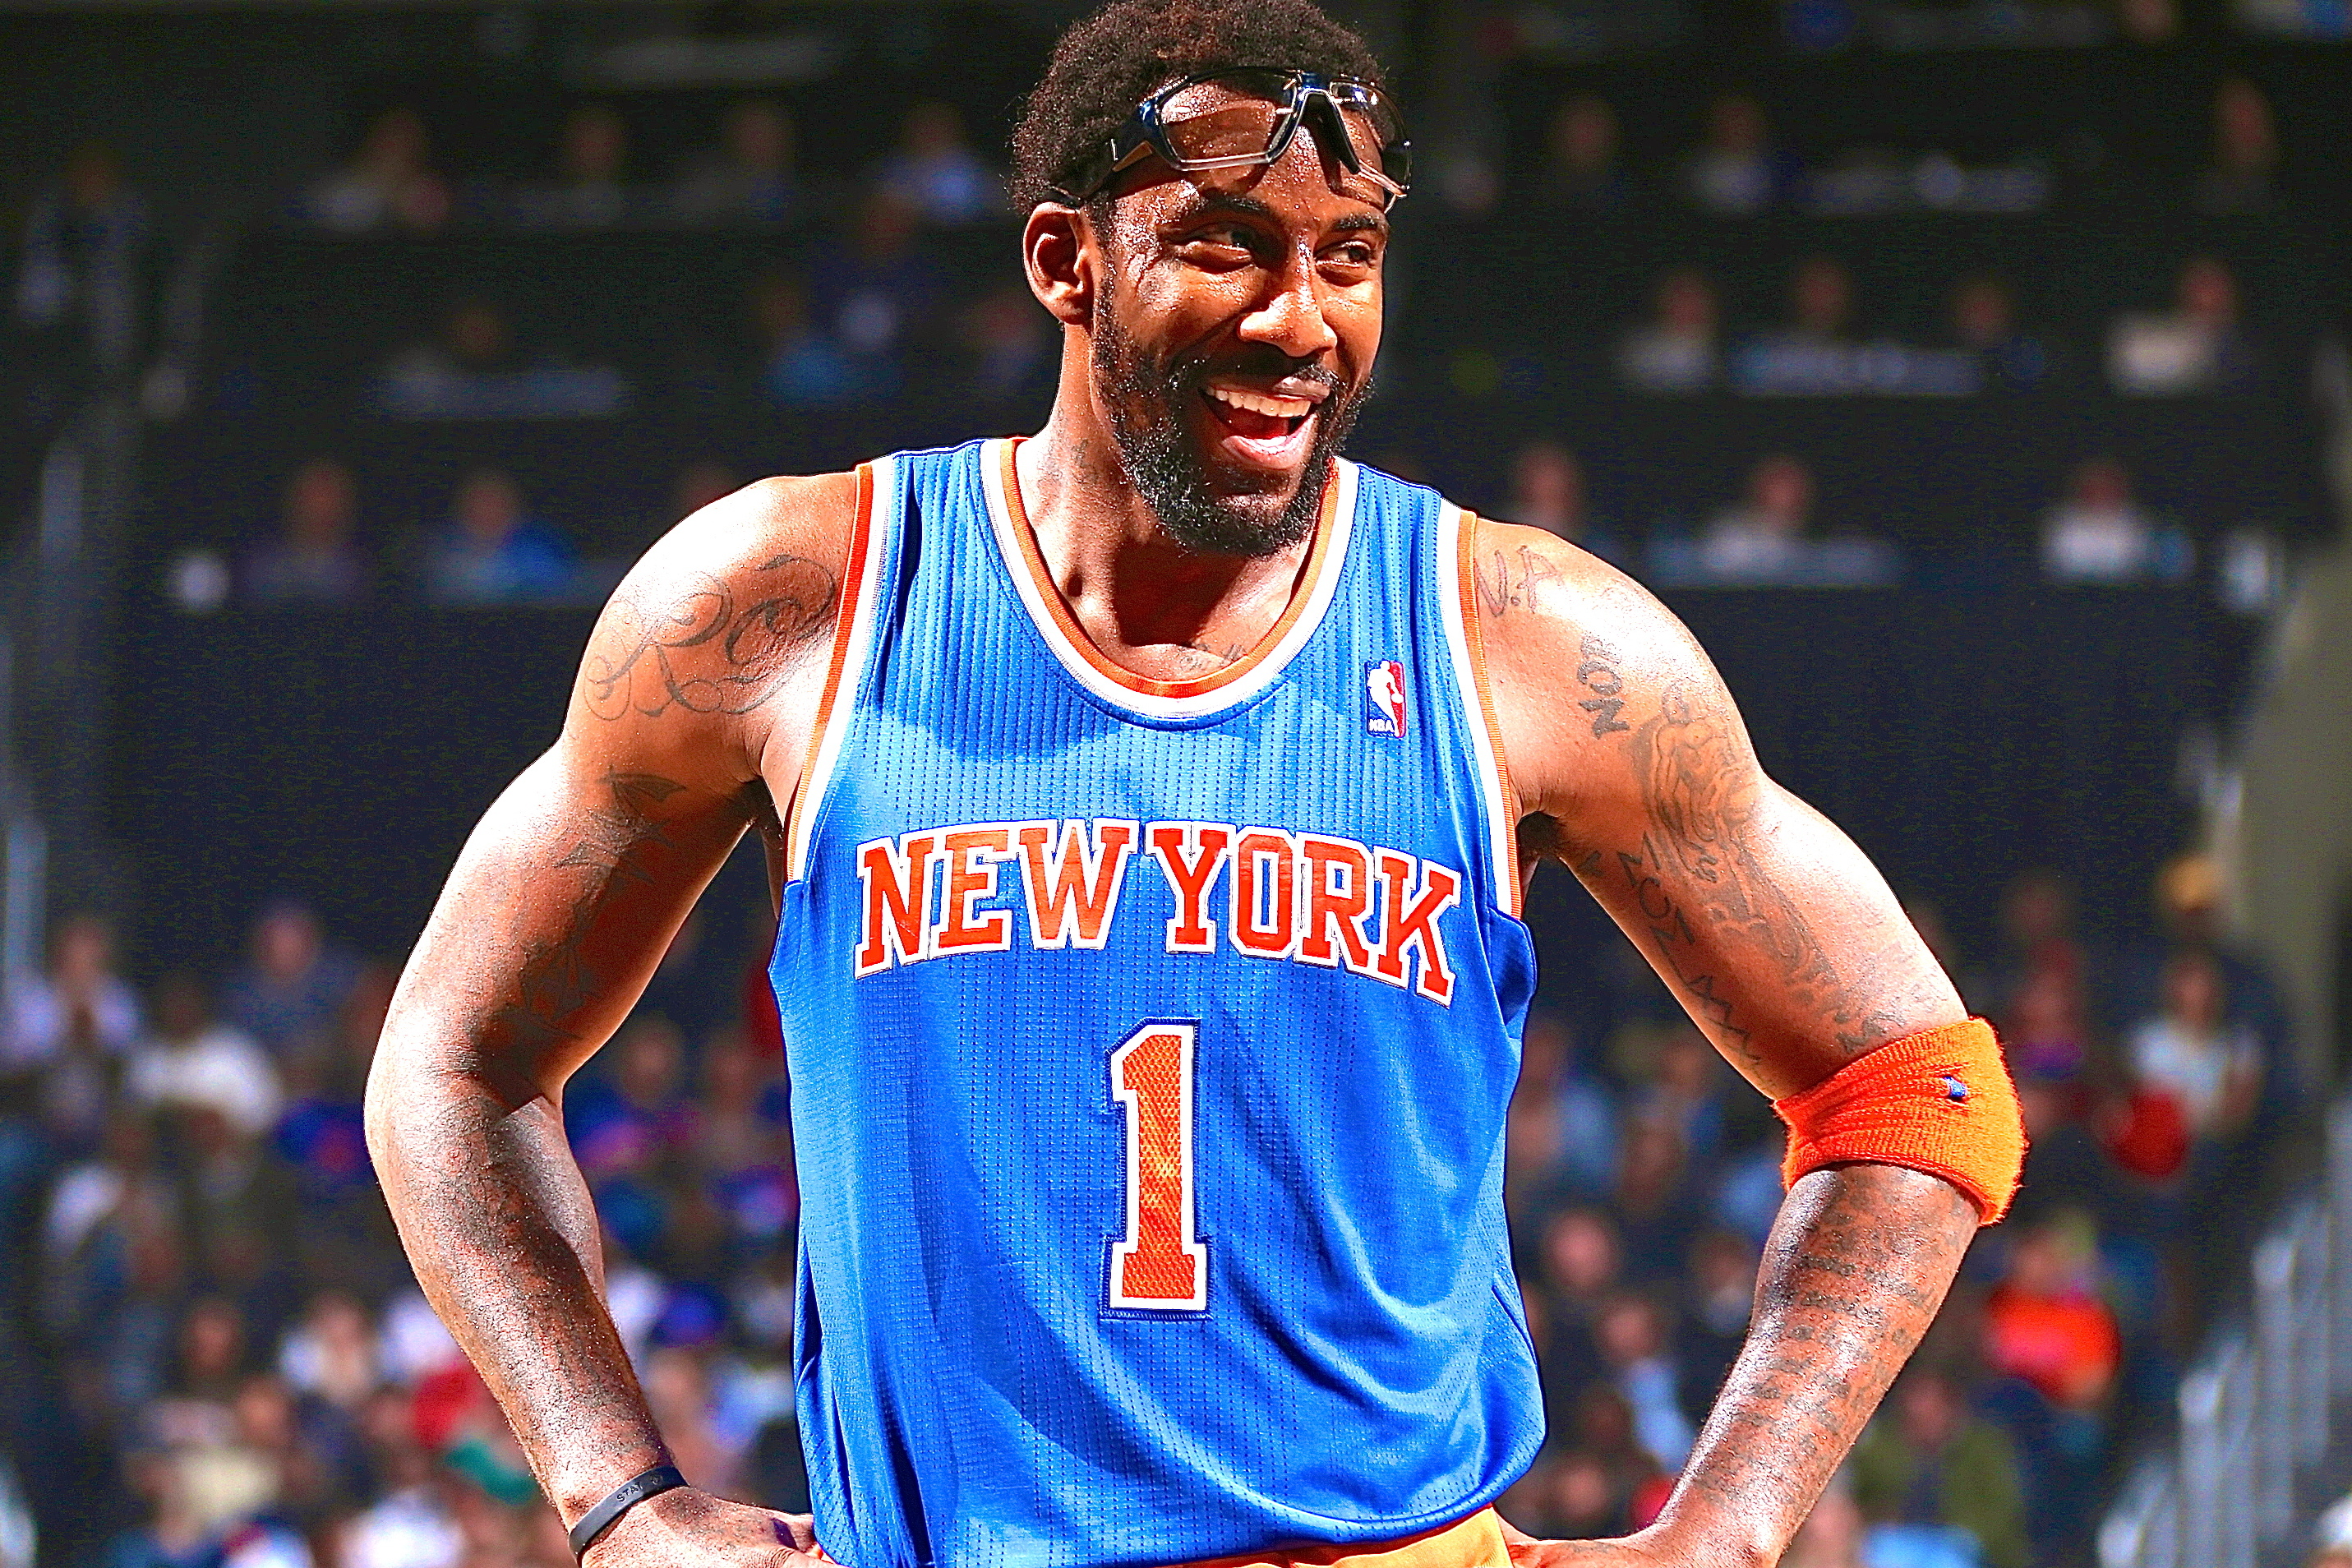 New York Knicks' Amar'e Stoudemire Proving He Can Still Be a Major